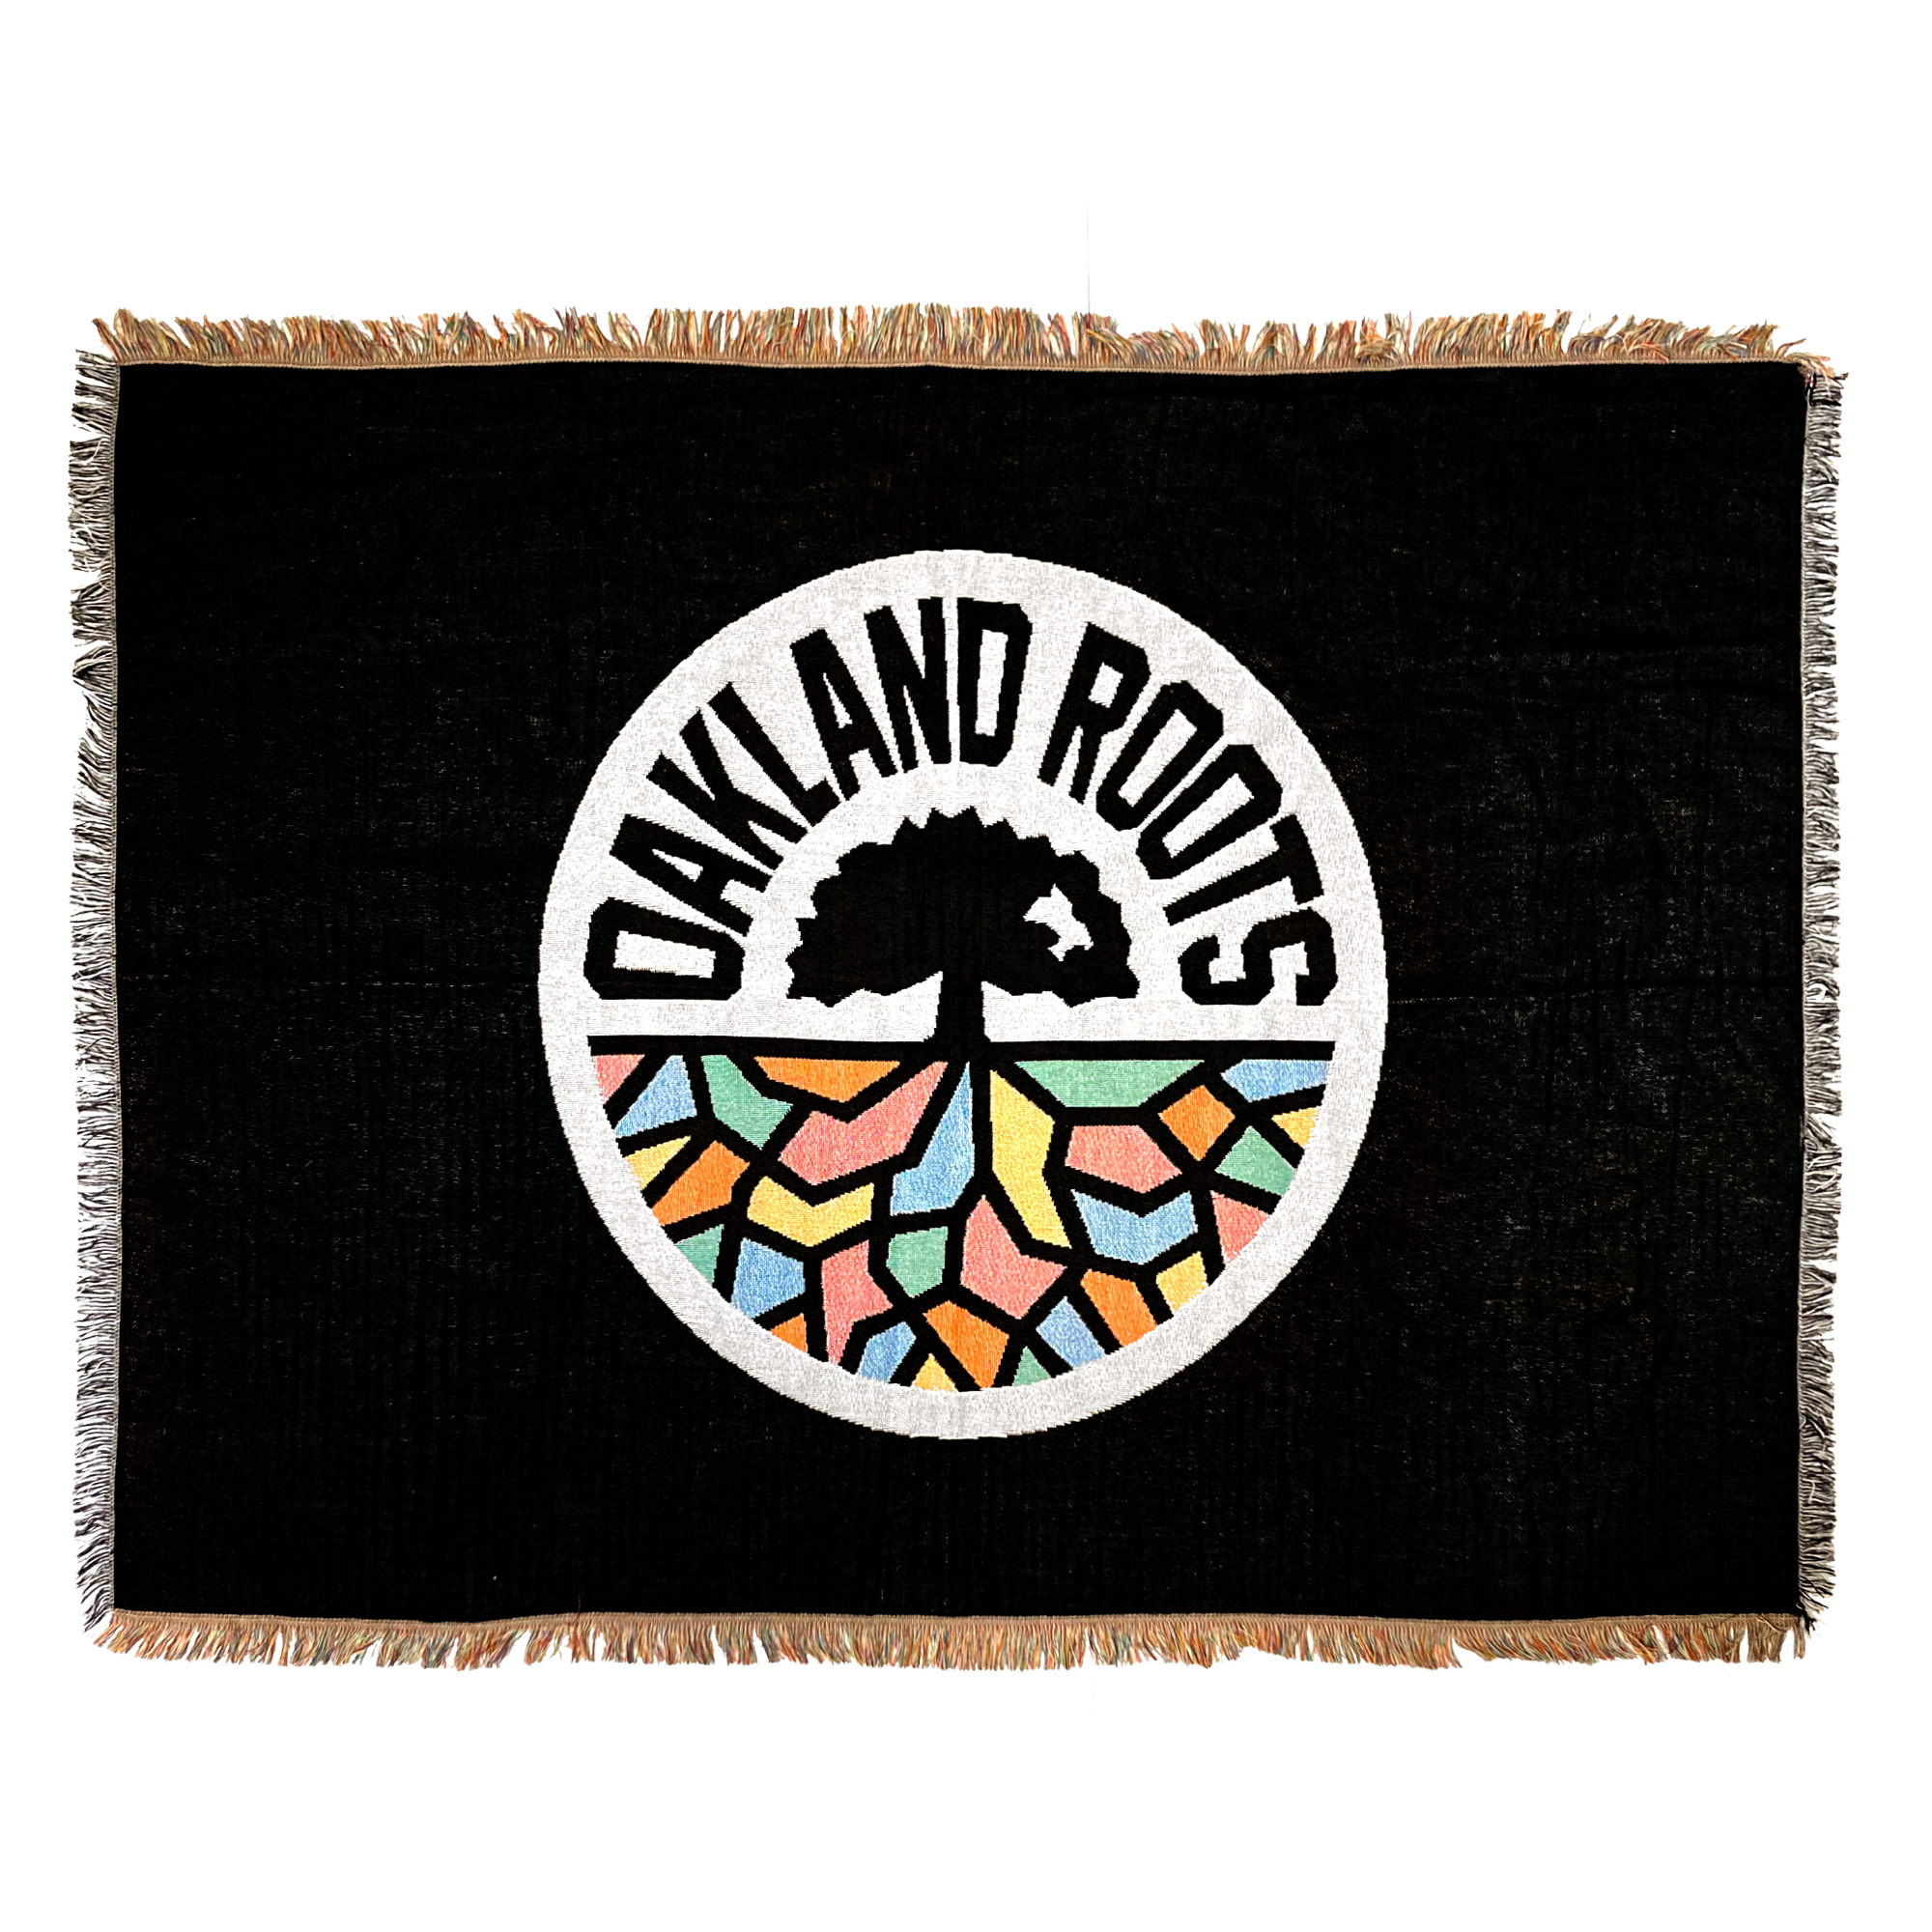 Black blanket with colored fringe and large full-color Oakland Roots SC circle logo in the center.